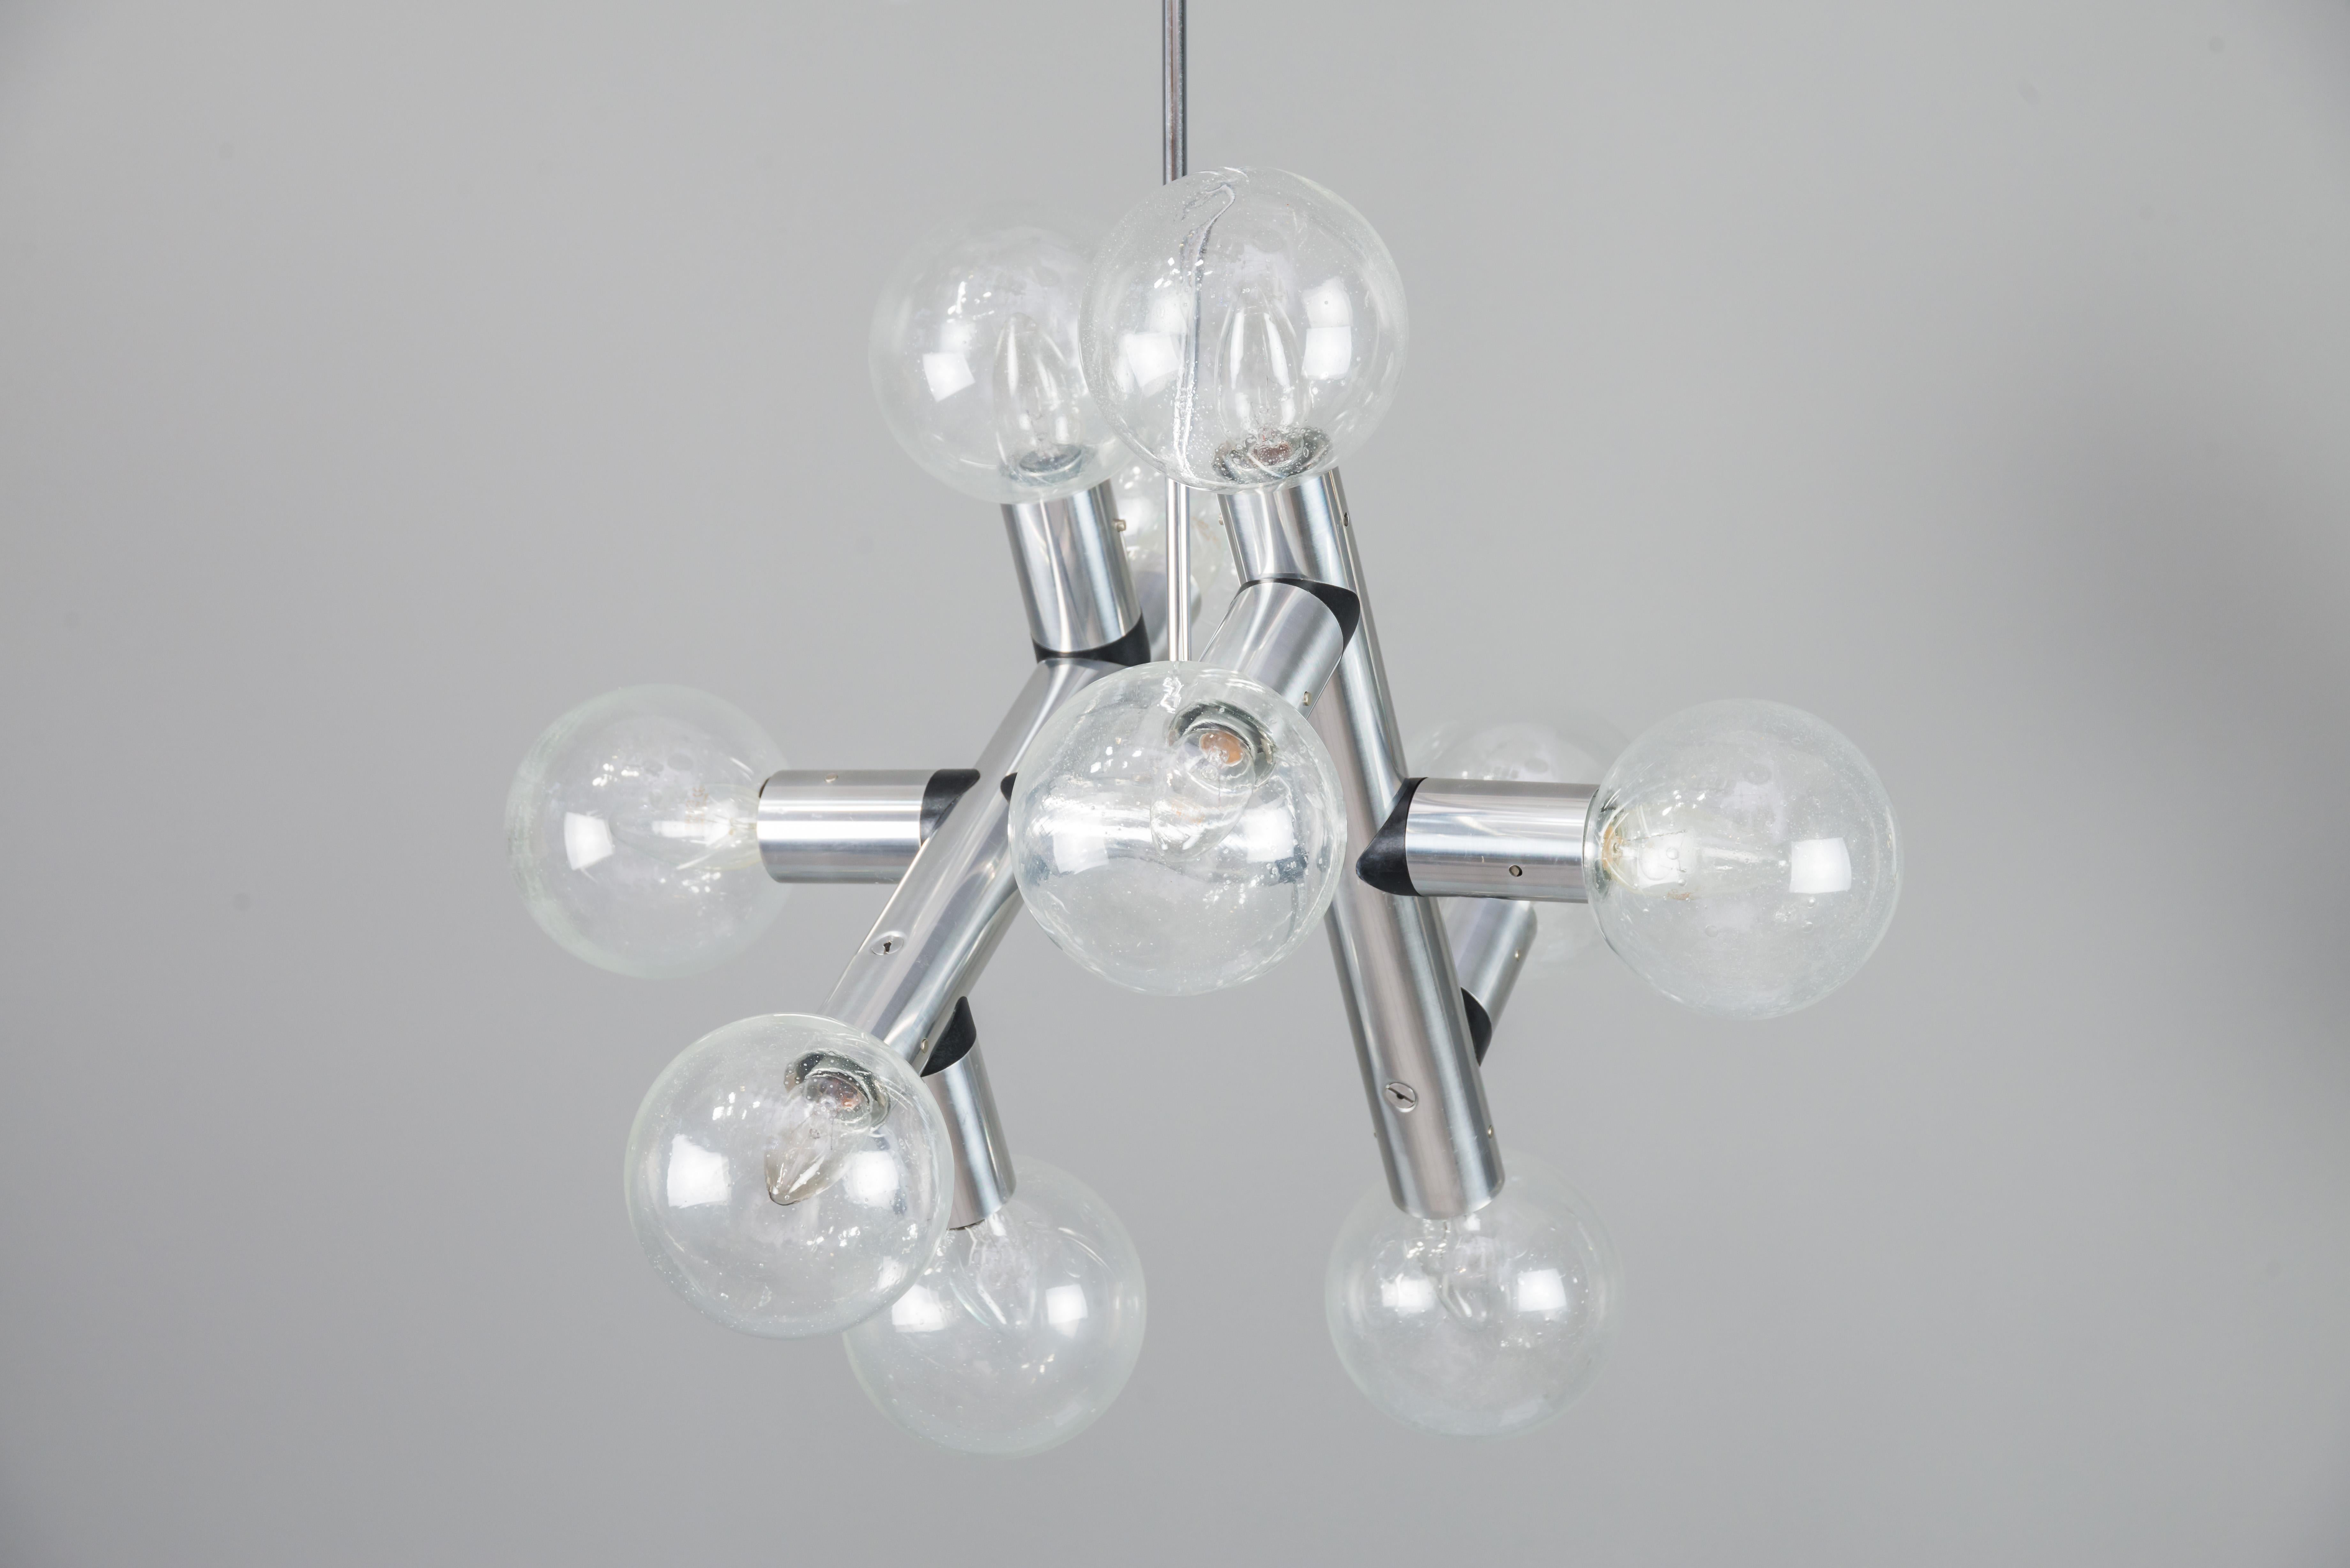 Kalmar atomic ceiling lamps chandeliers, 1960s
designed and executed by Kalmar Vienna in 1969.
Made of nickel-plated metal with nice ball lampshades made of clear class with small bubbles.
10 glass balls
Original condition.
 